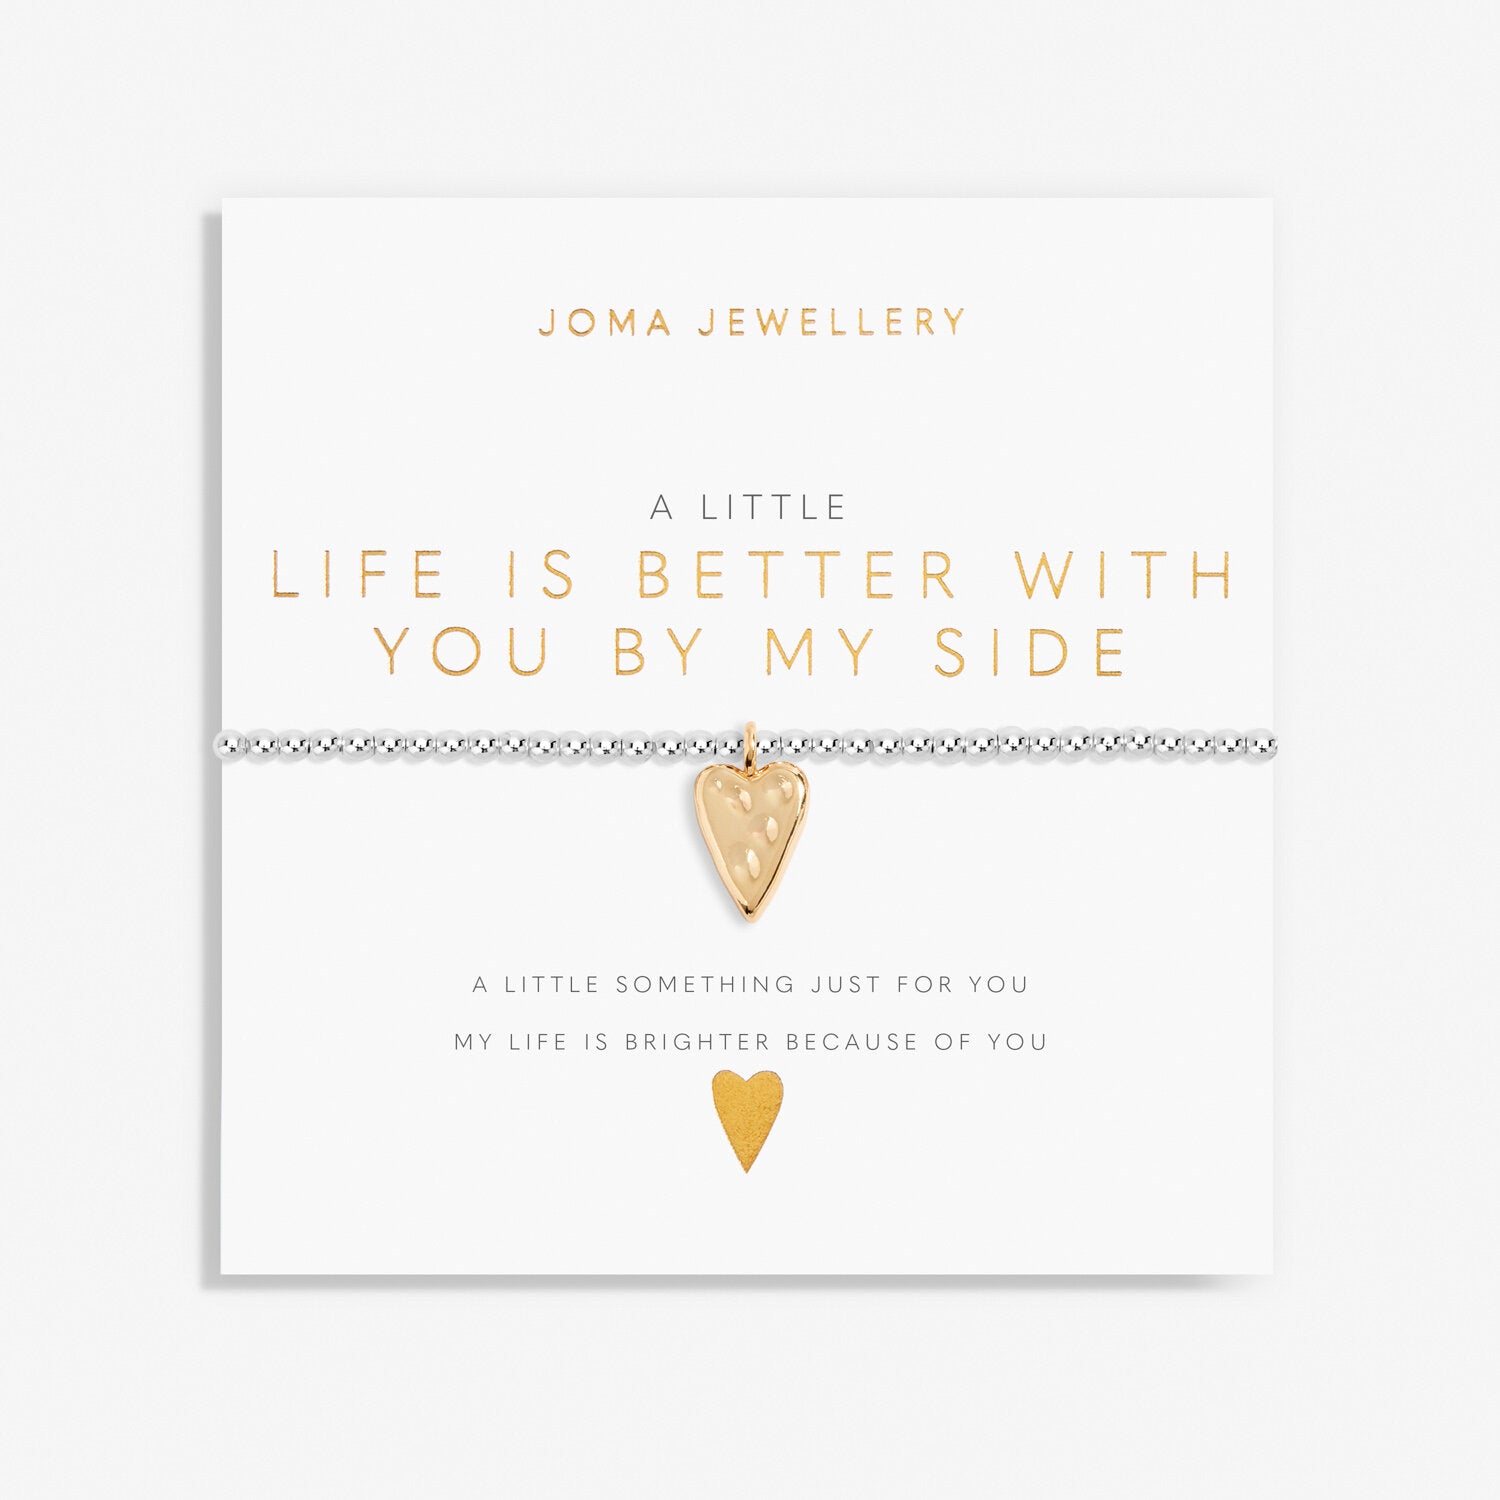 A Little - Life Is Better With You By My Side Bracelet - Joma jewellery